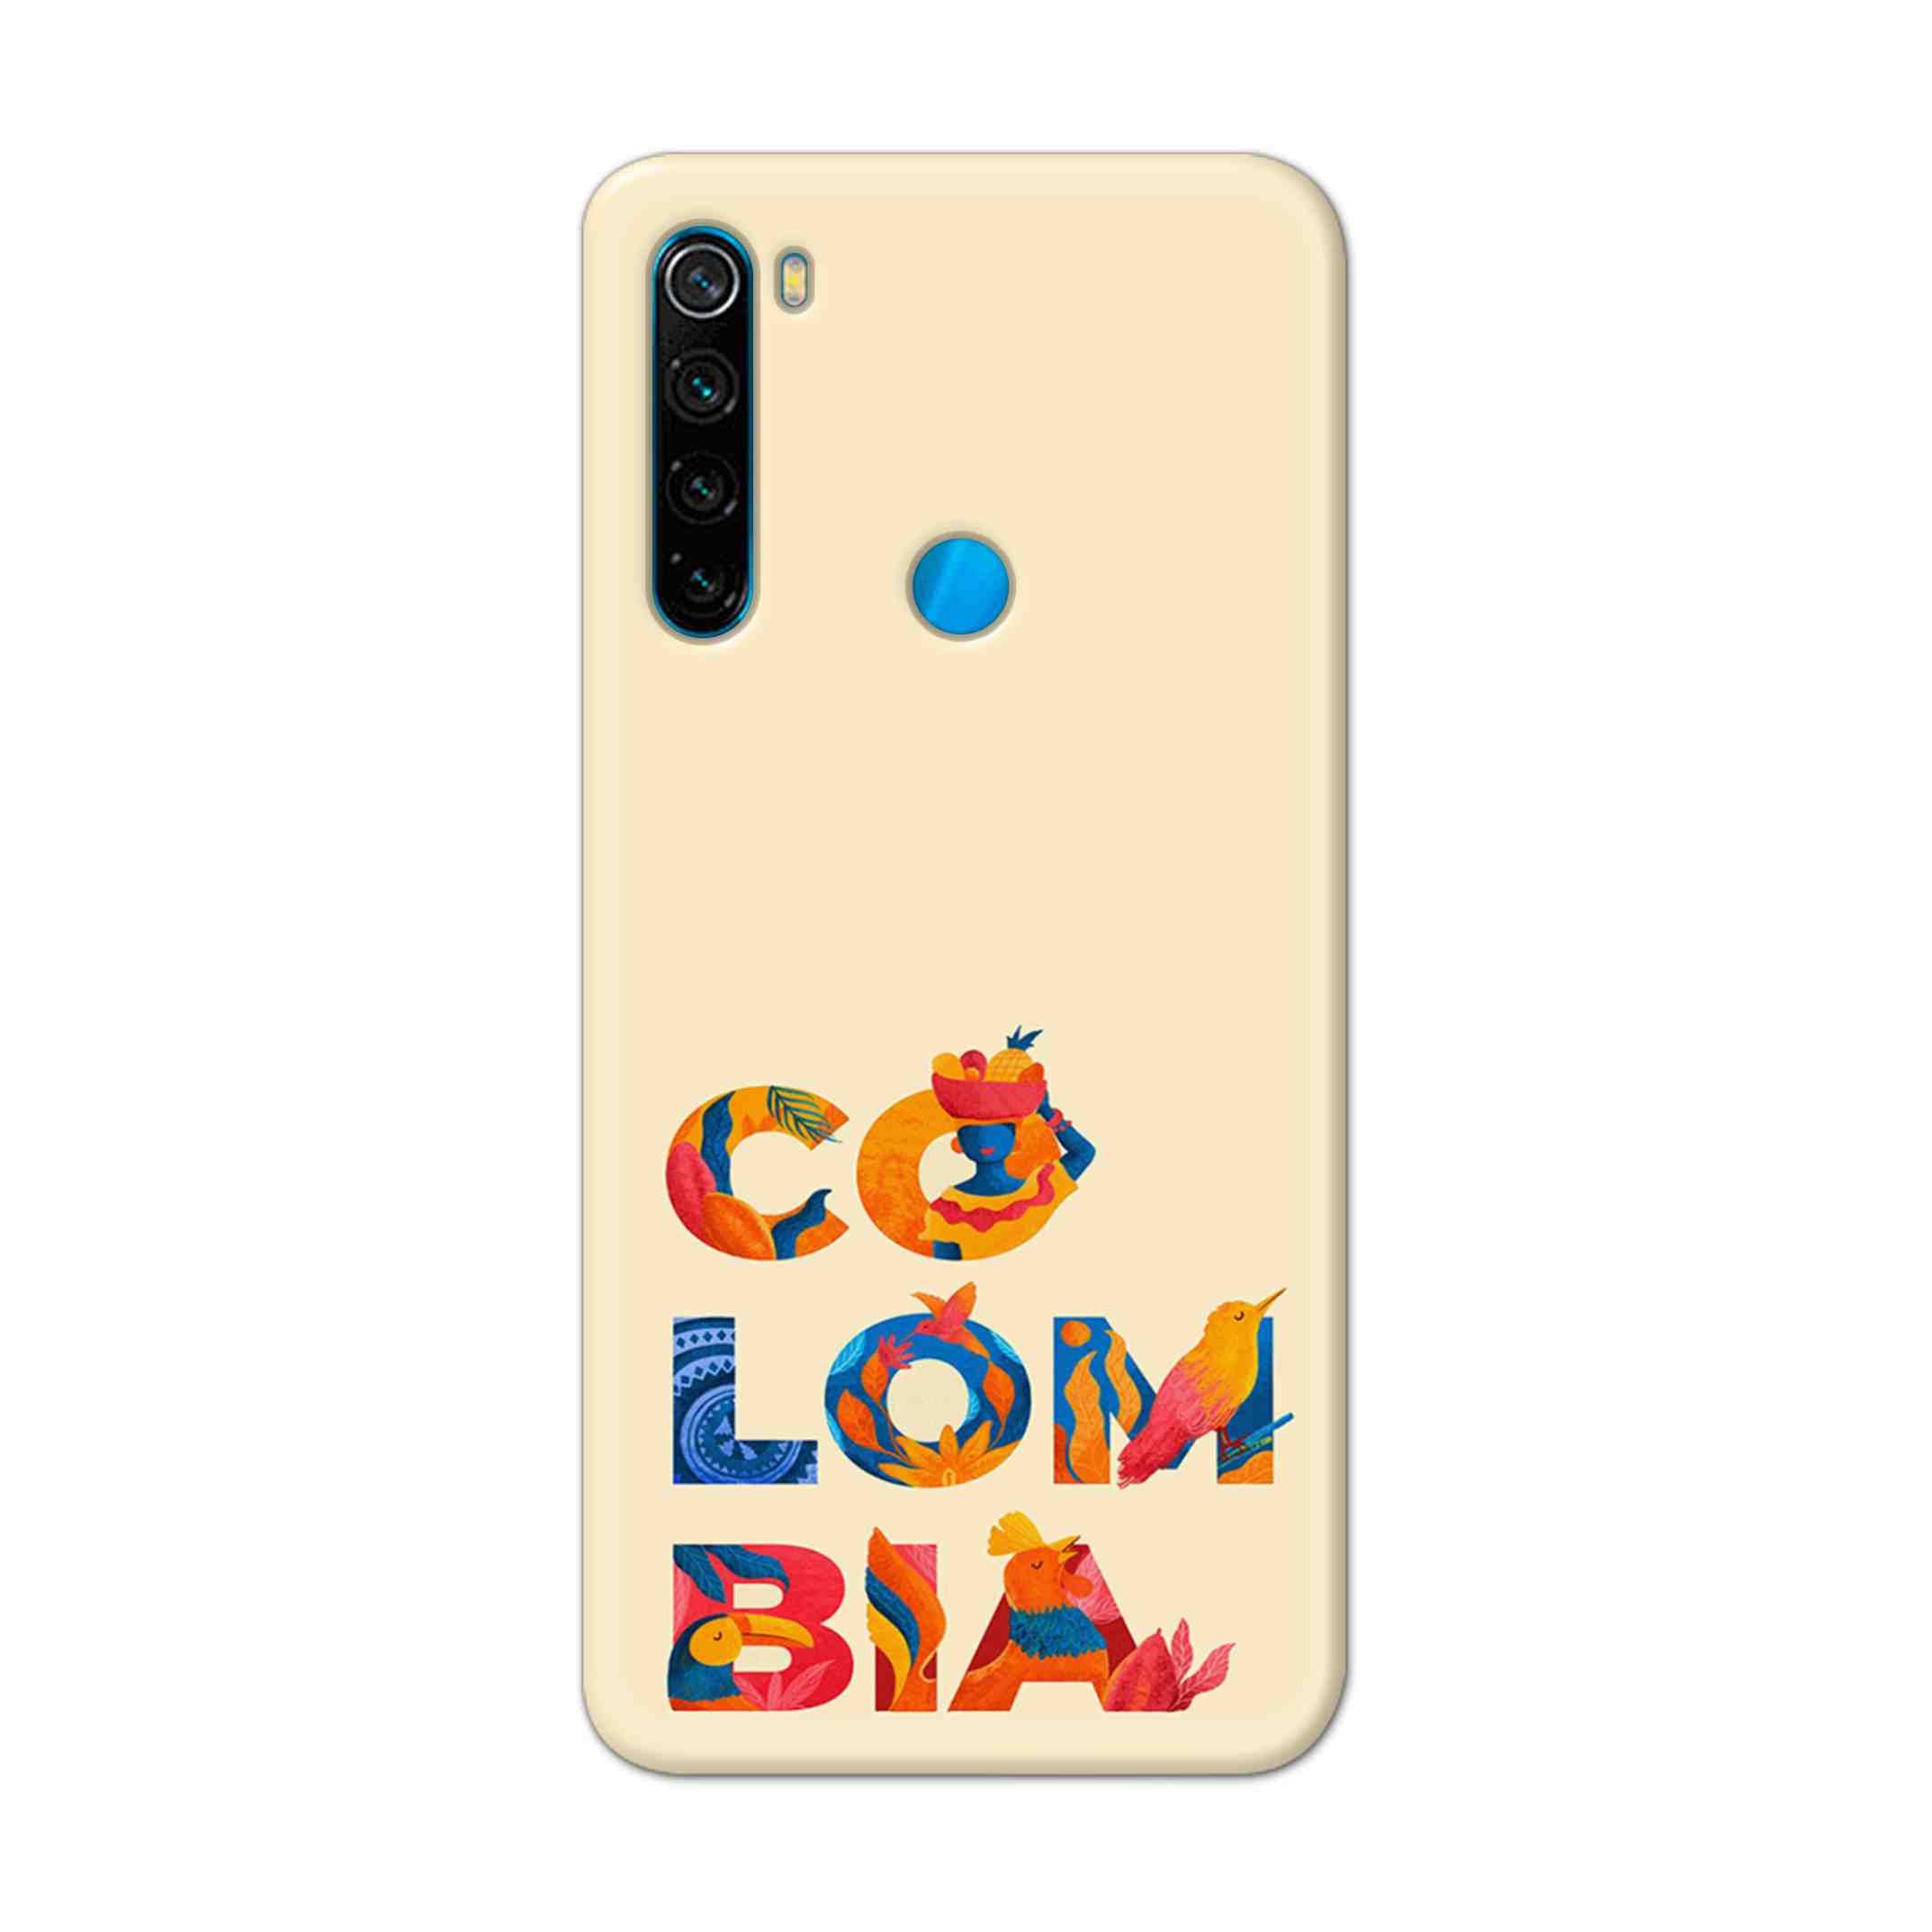 Buy Colombia Hard Back Mobile Phone Case Cover For Xiaomi Redmi Note 8 Online